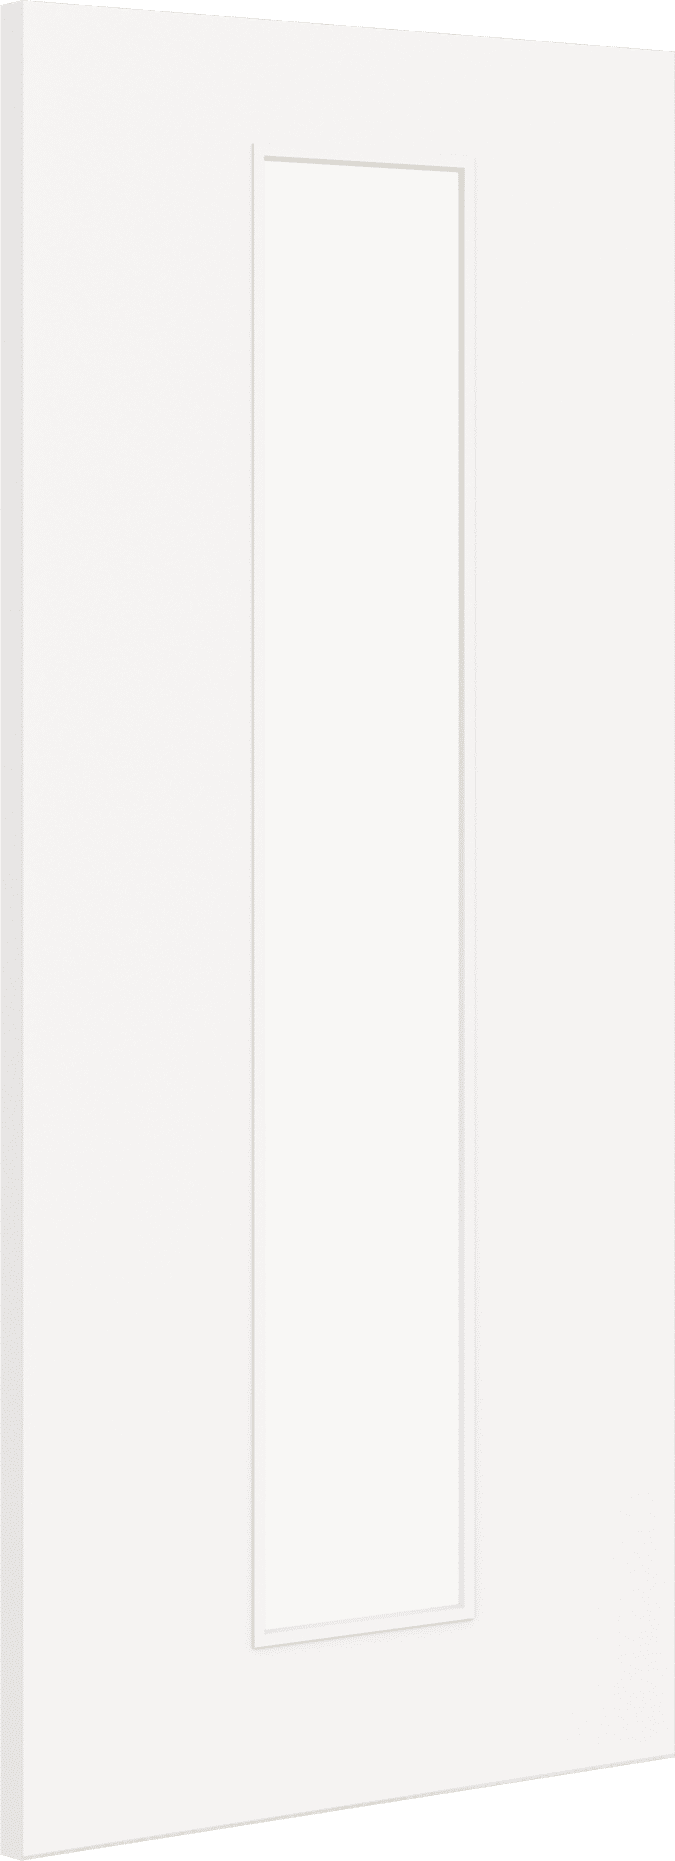 1981mm x 533mm x 44mm (21") Architectural Paint Grade White 10 Frosted Glazed Fire Door Blank